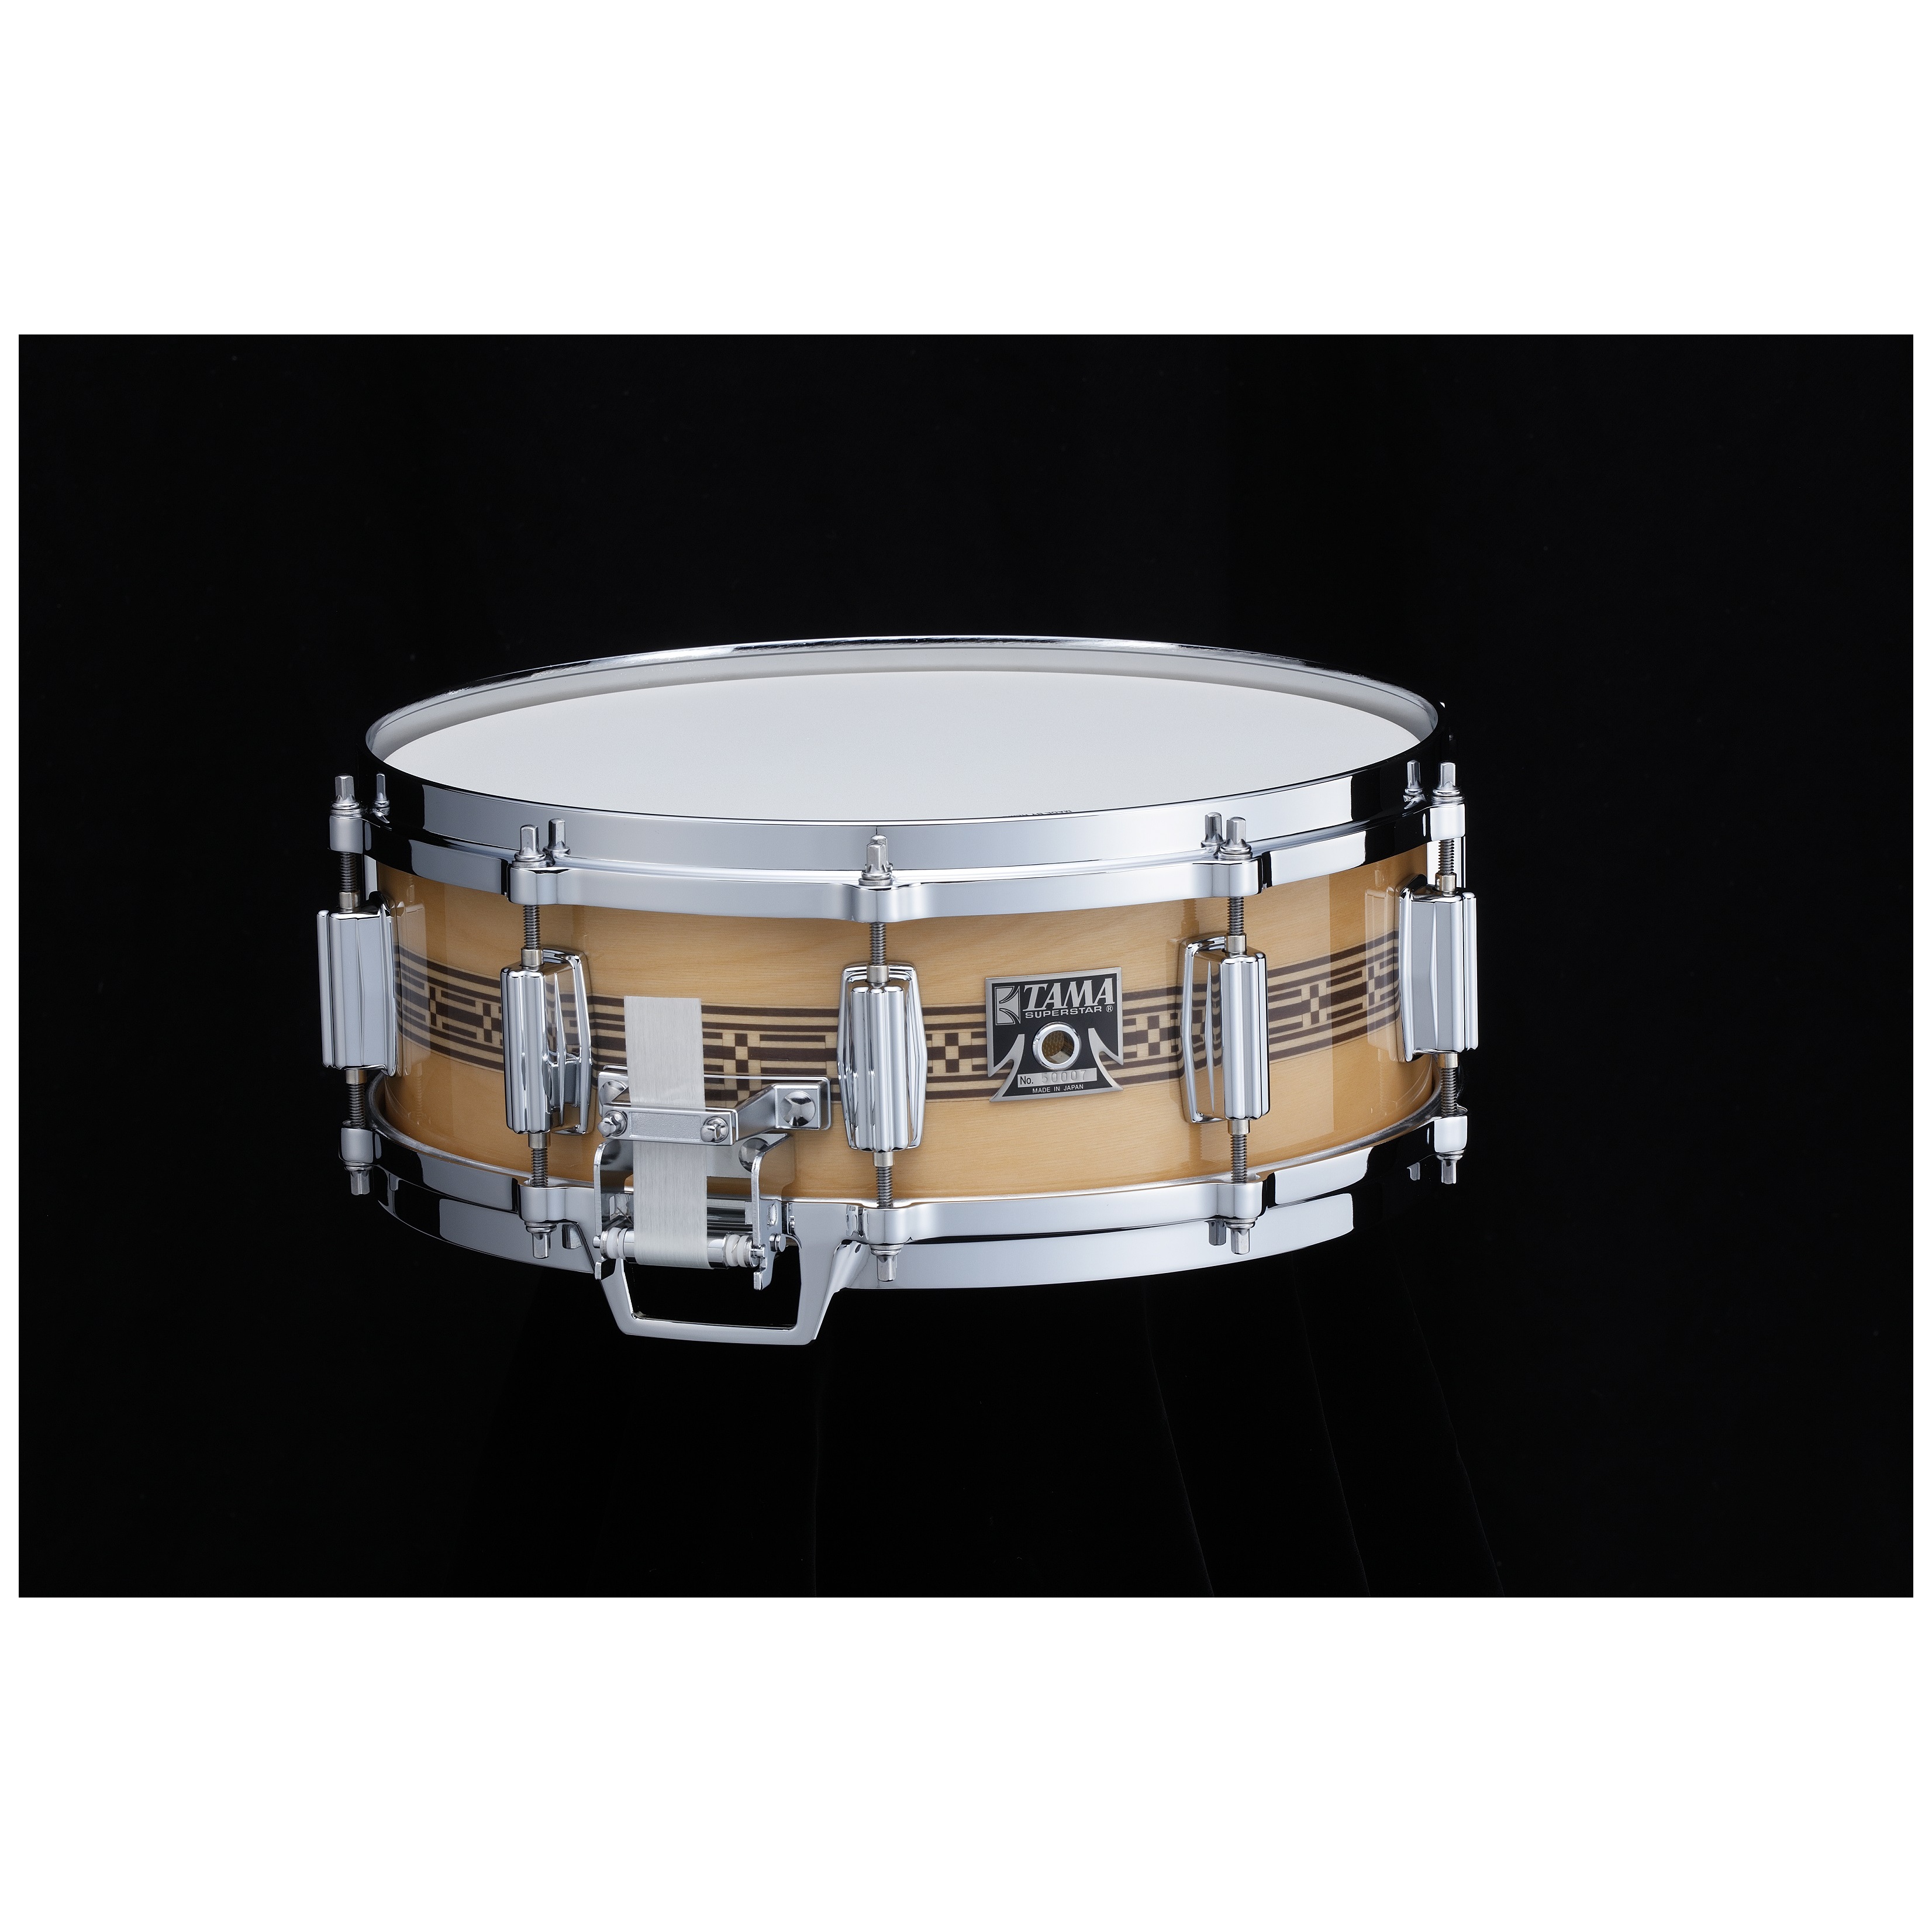 Tama AW-455 - 50th LIMITED Mastercraft Artwood Snare  Drum 14"x6,5" 1